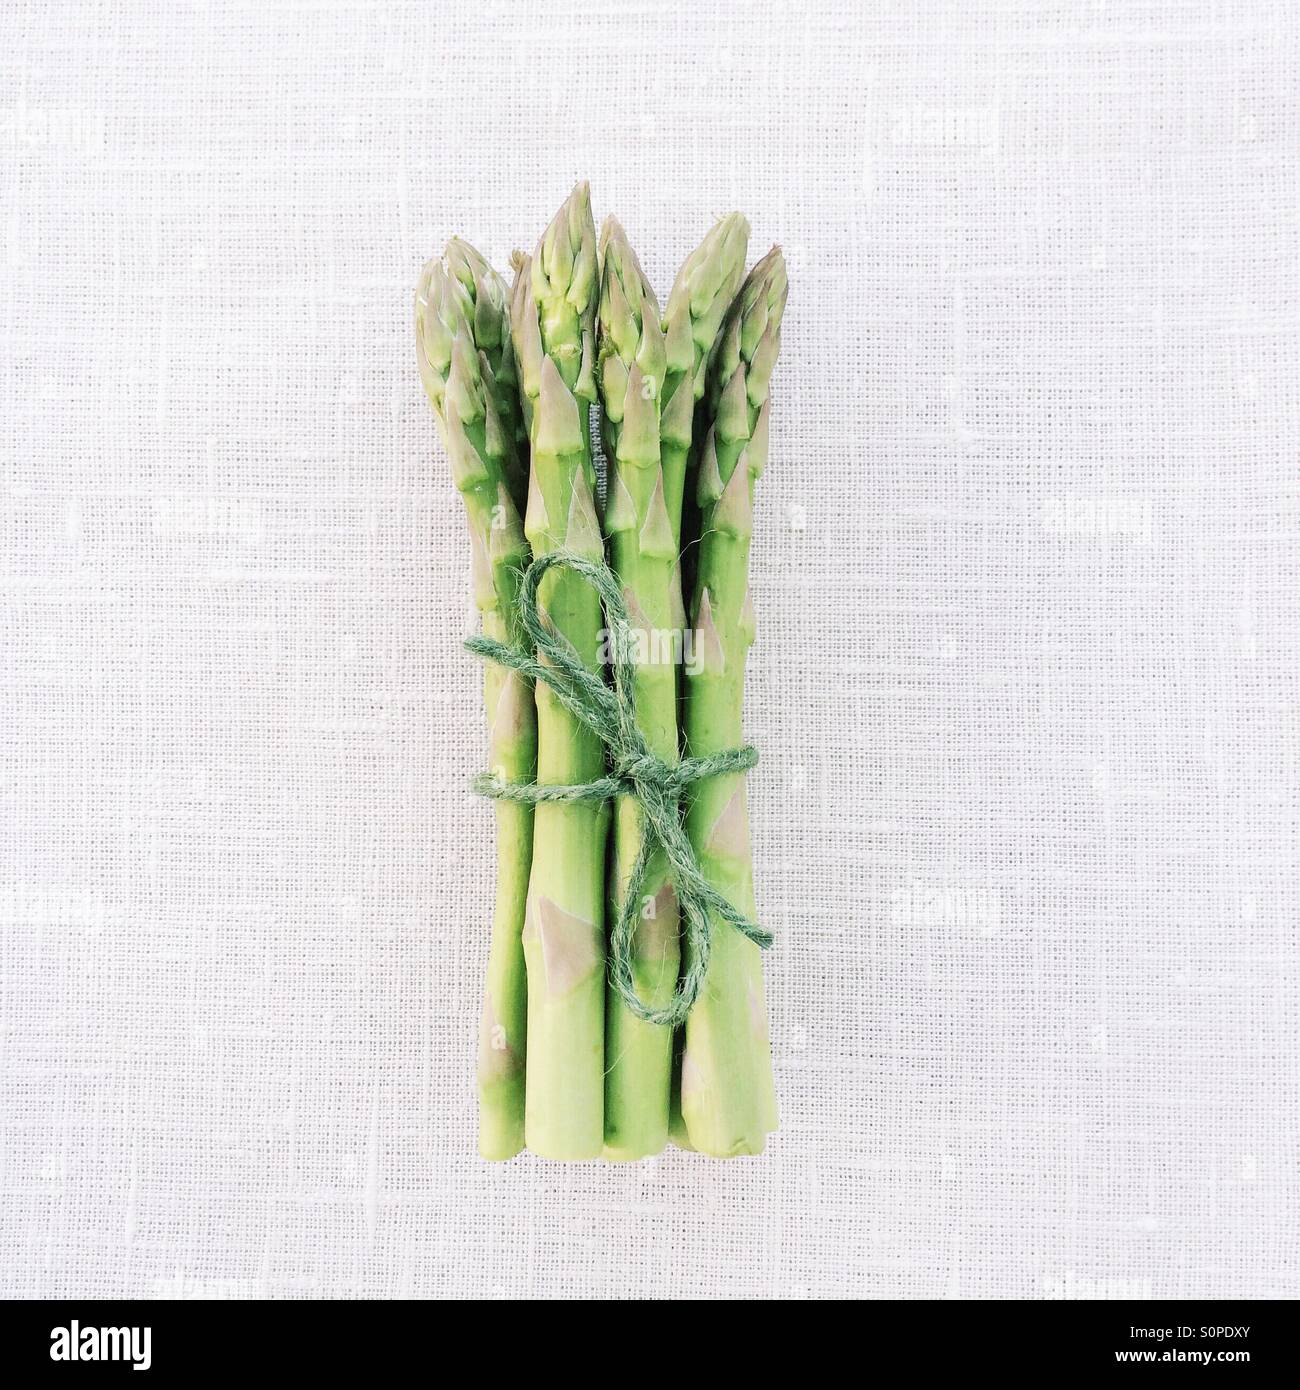 Bunch of Asparagus tied with string Stock Photo